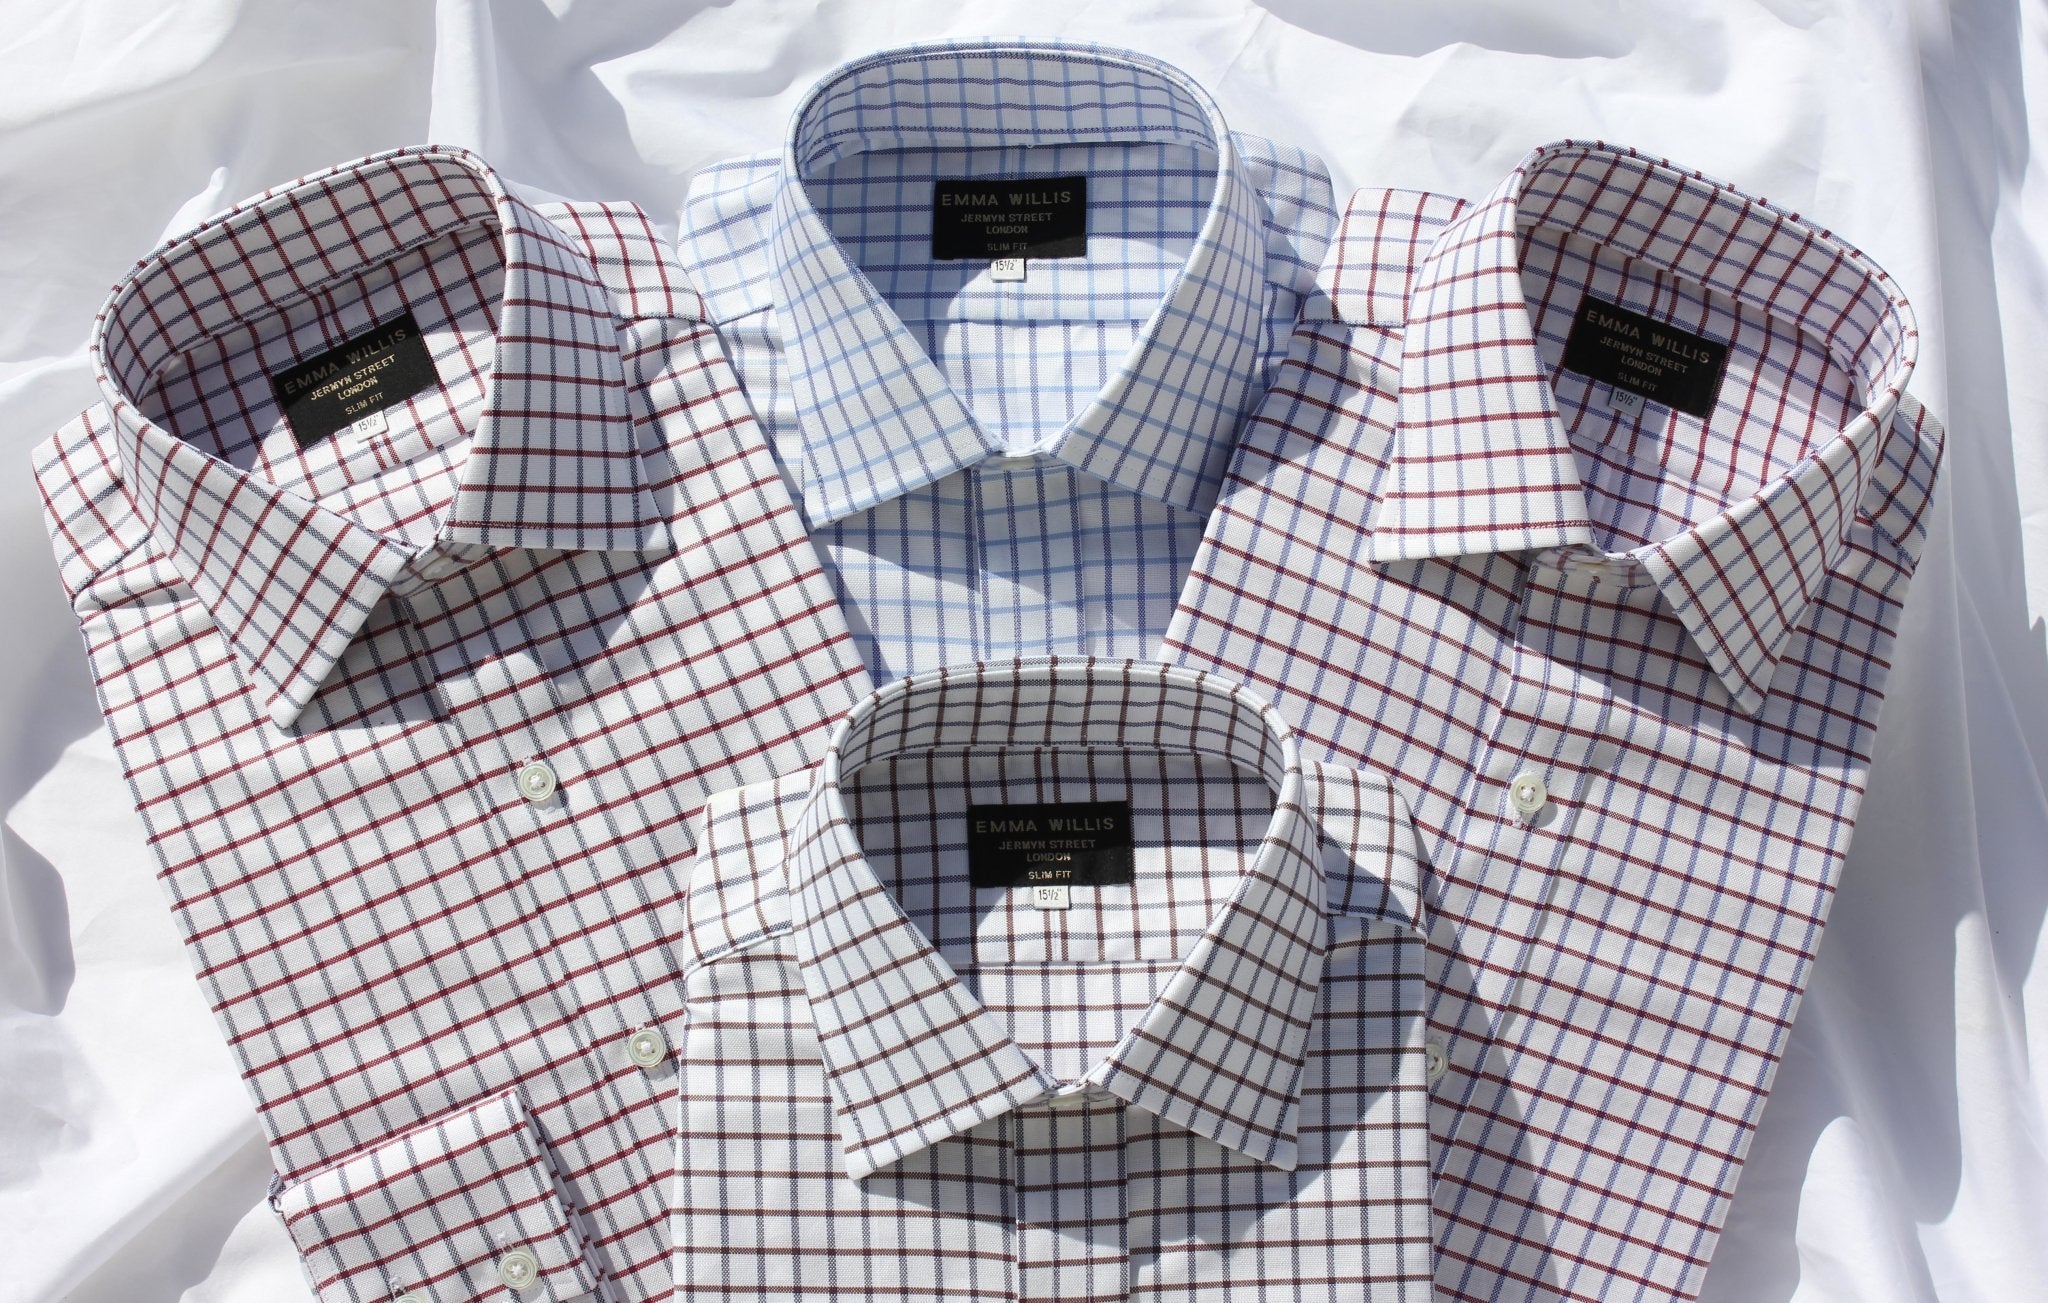 New, Exclusive to Emma Willis, Oxford Check Shirt Collection - Emma Willis